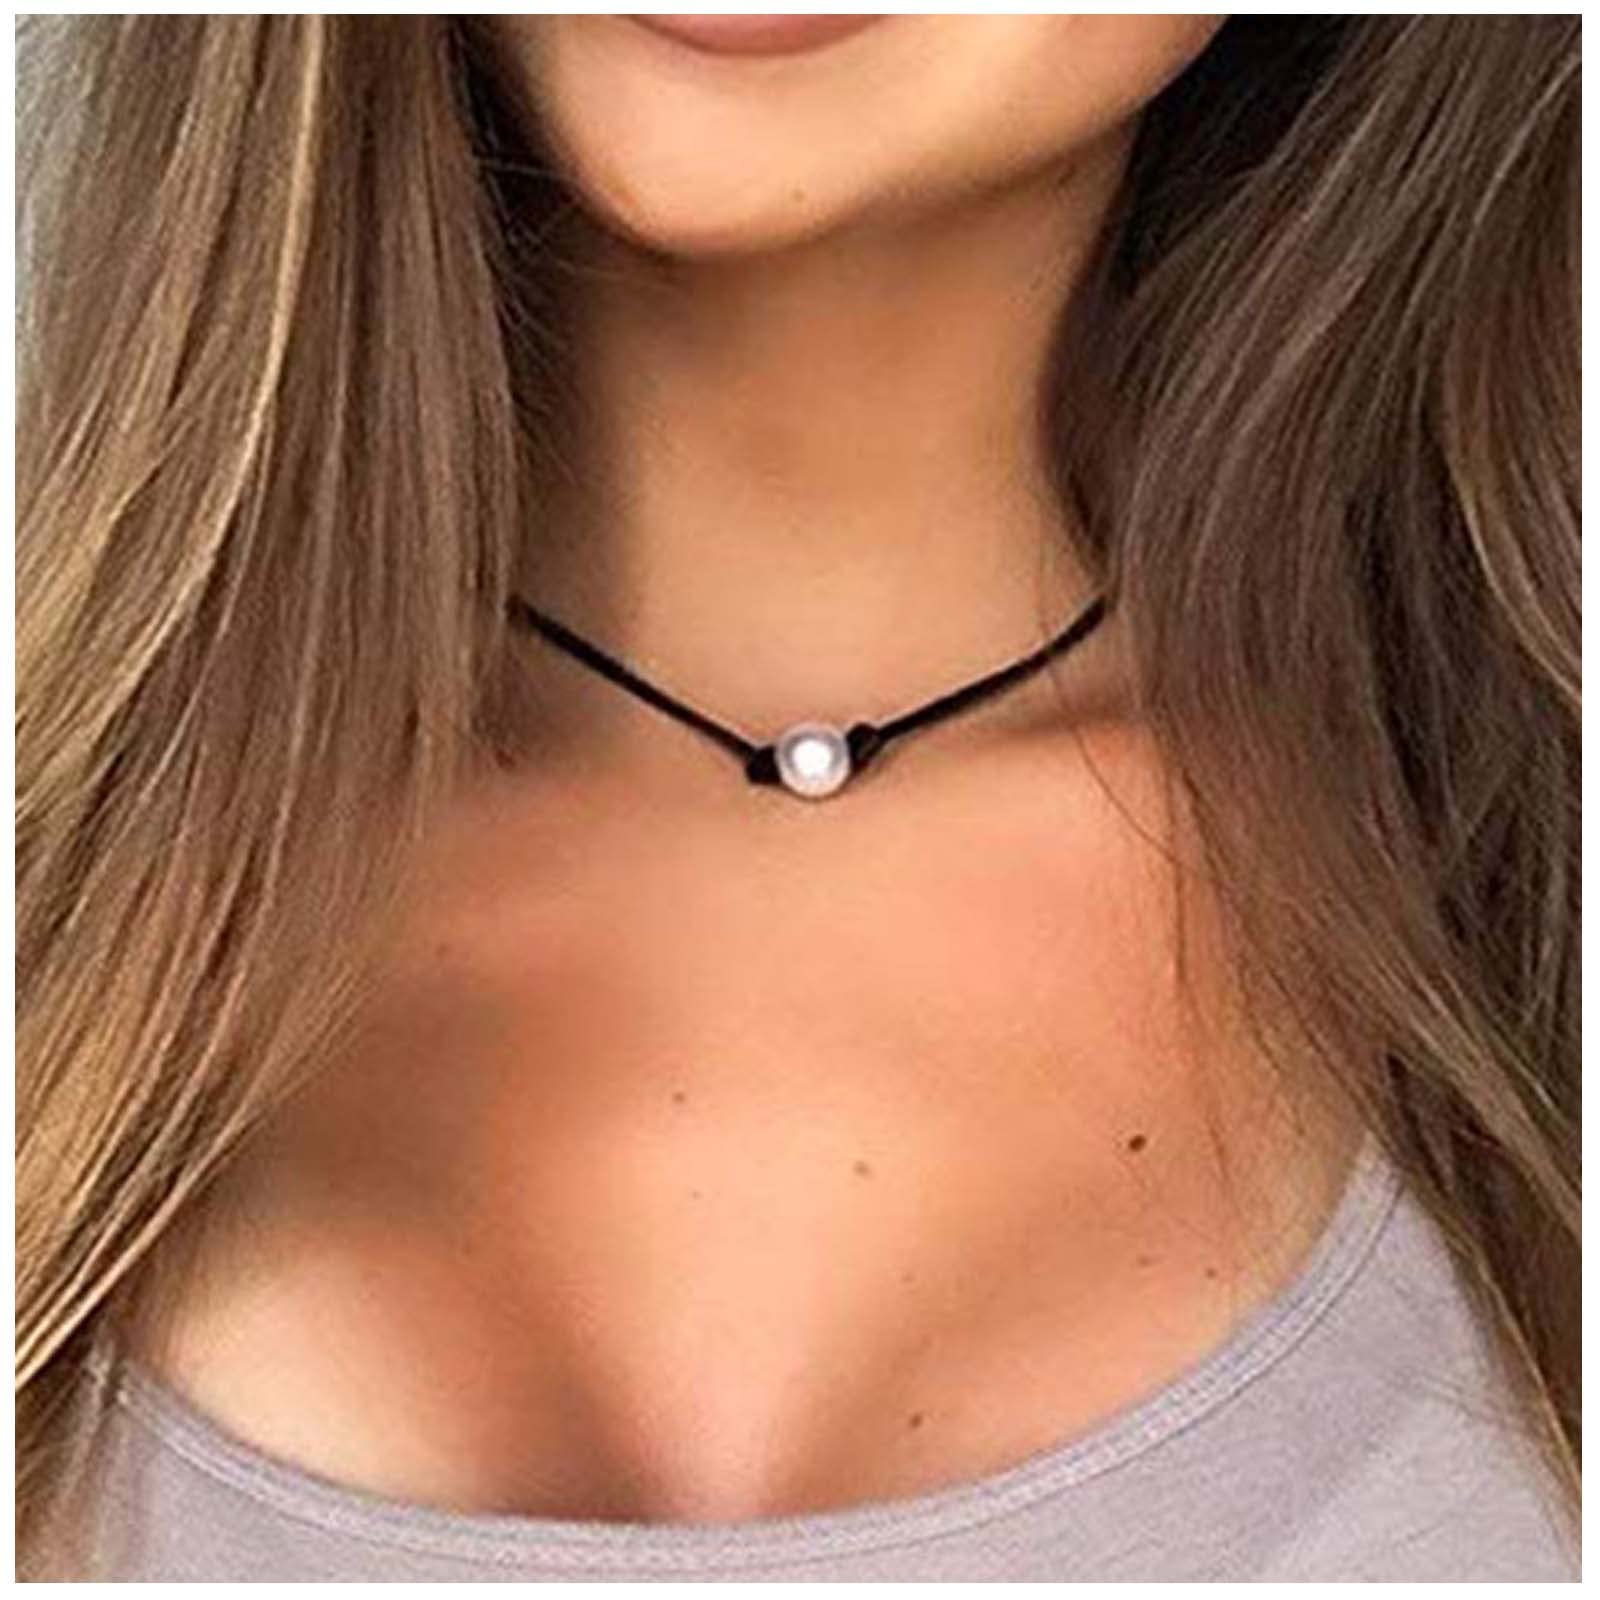 Yheakne Boho Pearl Suede Choker Necklace Black Leather Cord Necklace  Floating Pearl Necklace Minimalist Leather Collar Necklace Chain Jewelry  for Women and Girls Gifts